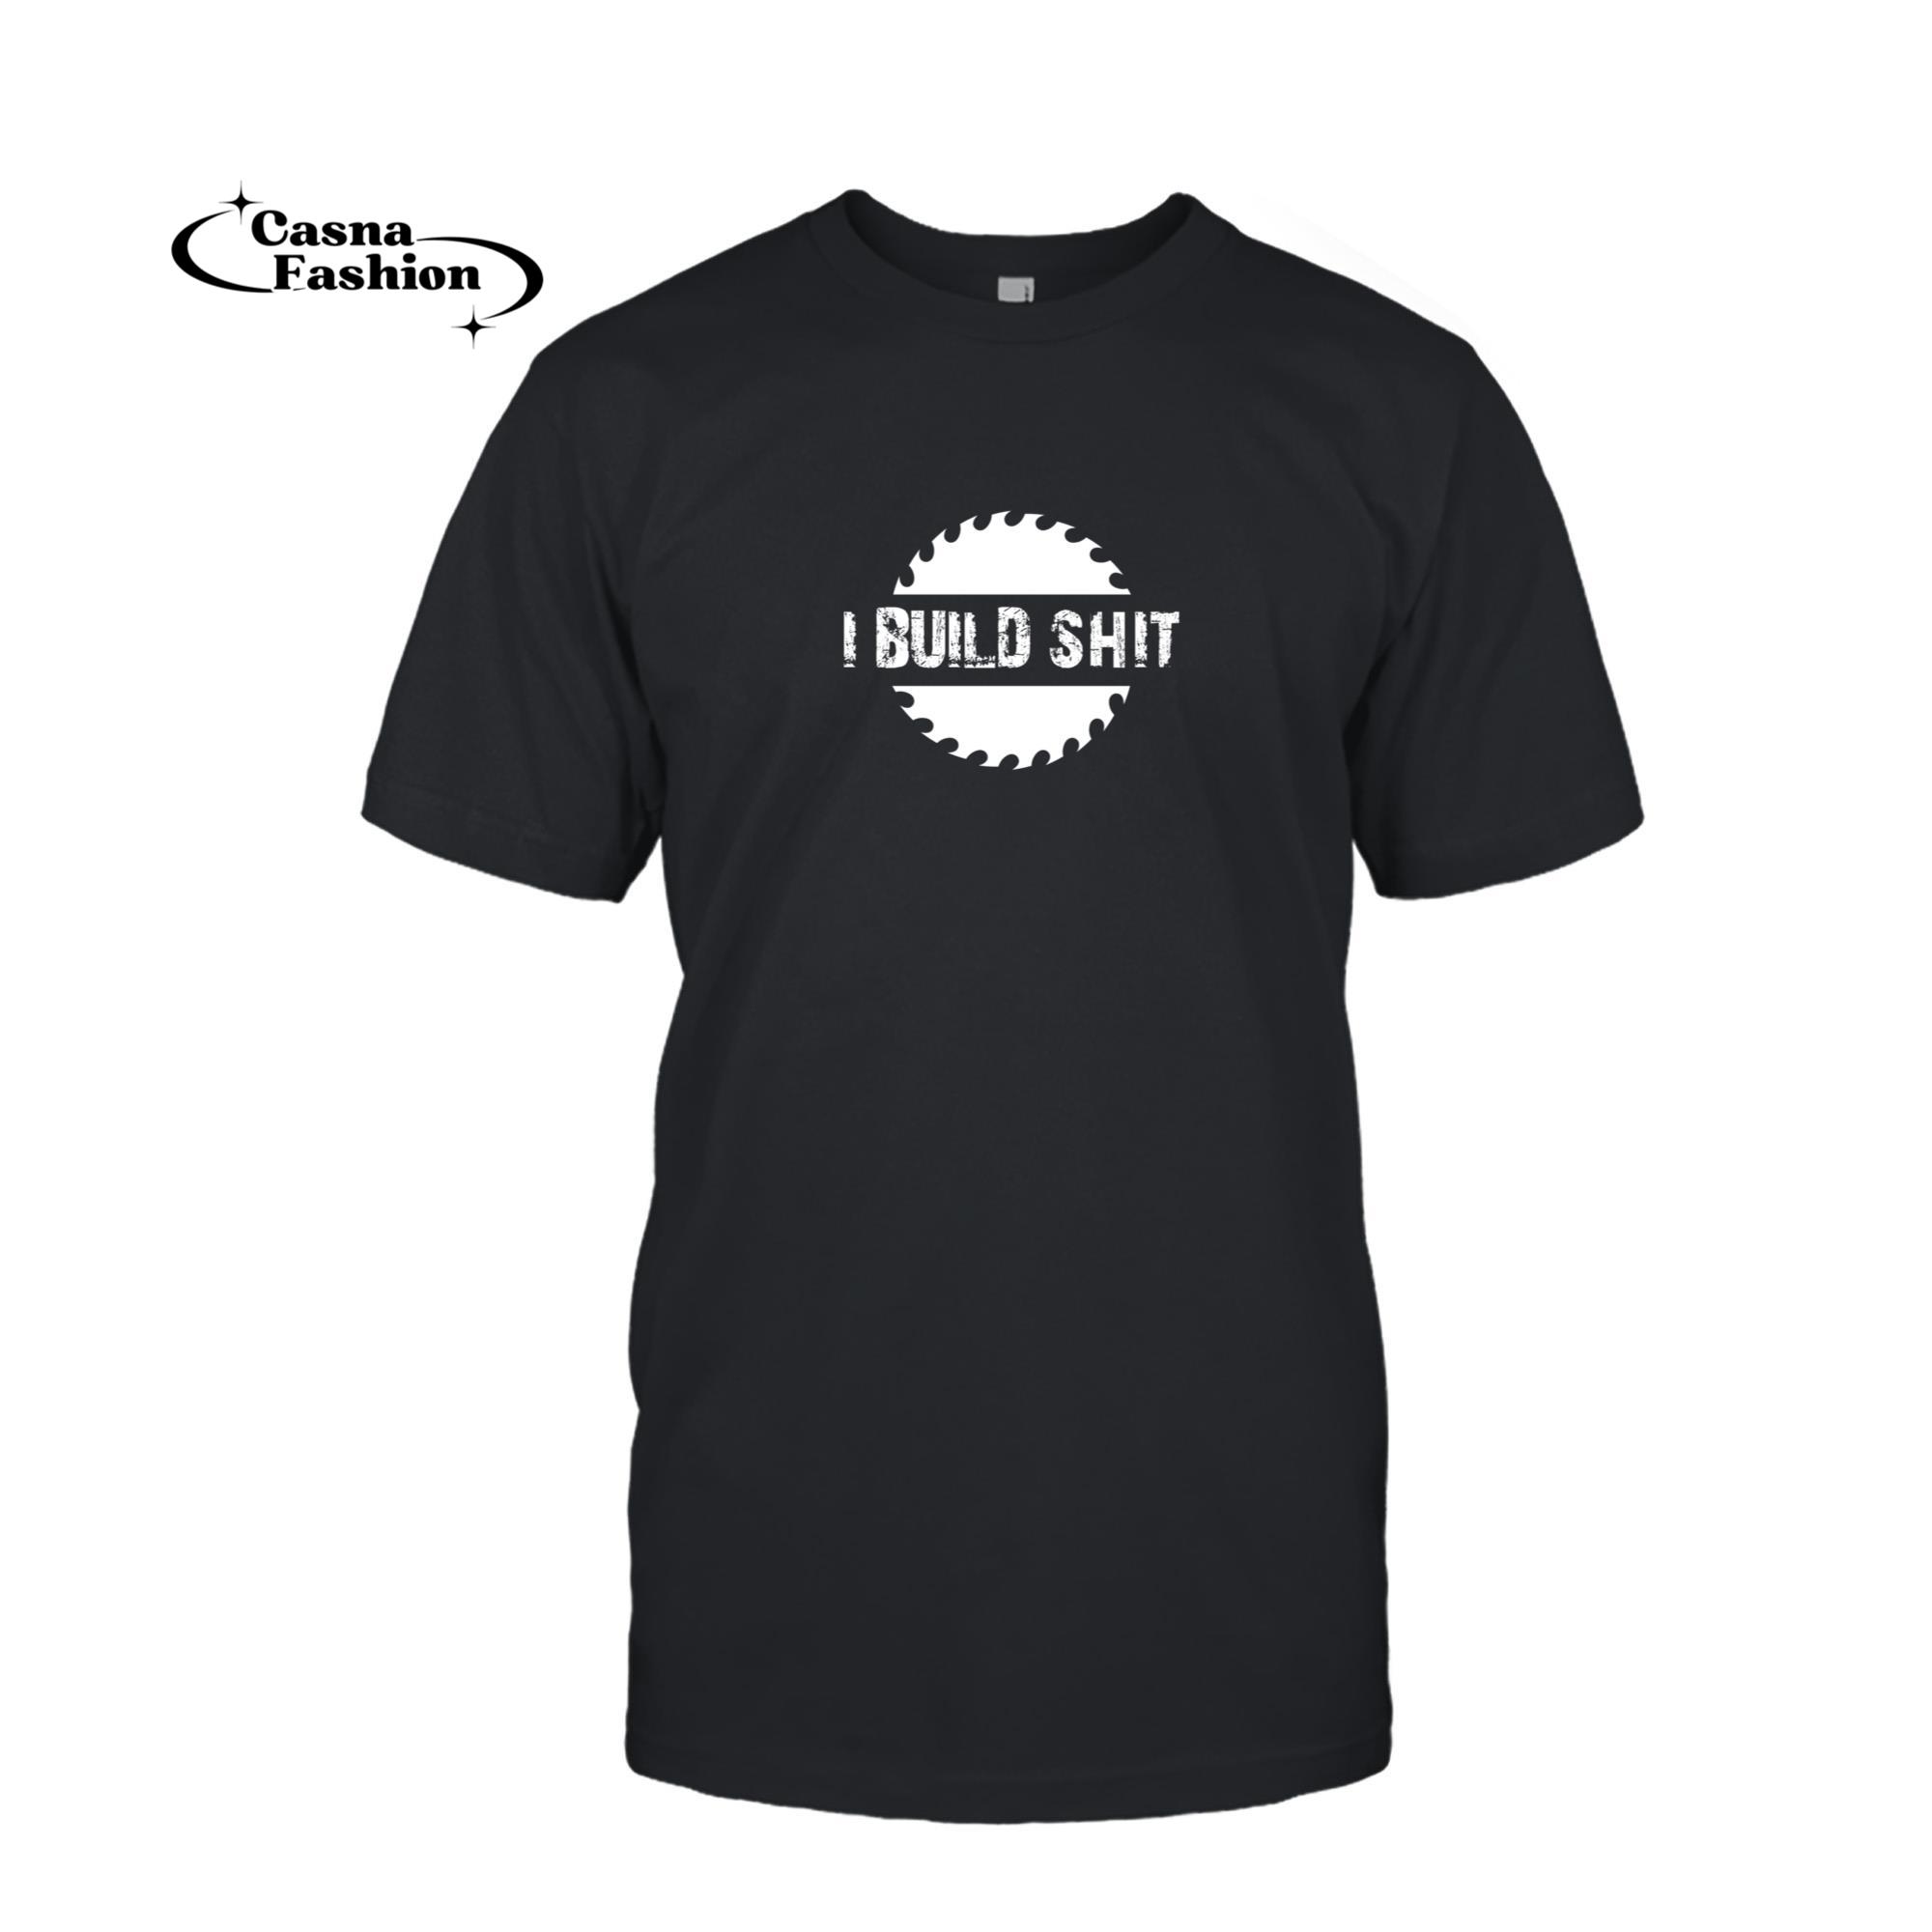 casnafashion_T-shirt_I Build Shit Woodworker and Carpenter Pullover Hoodie_T-shirt_Black